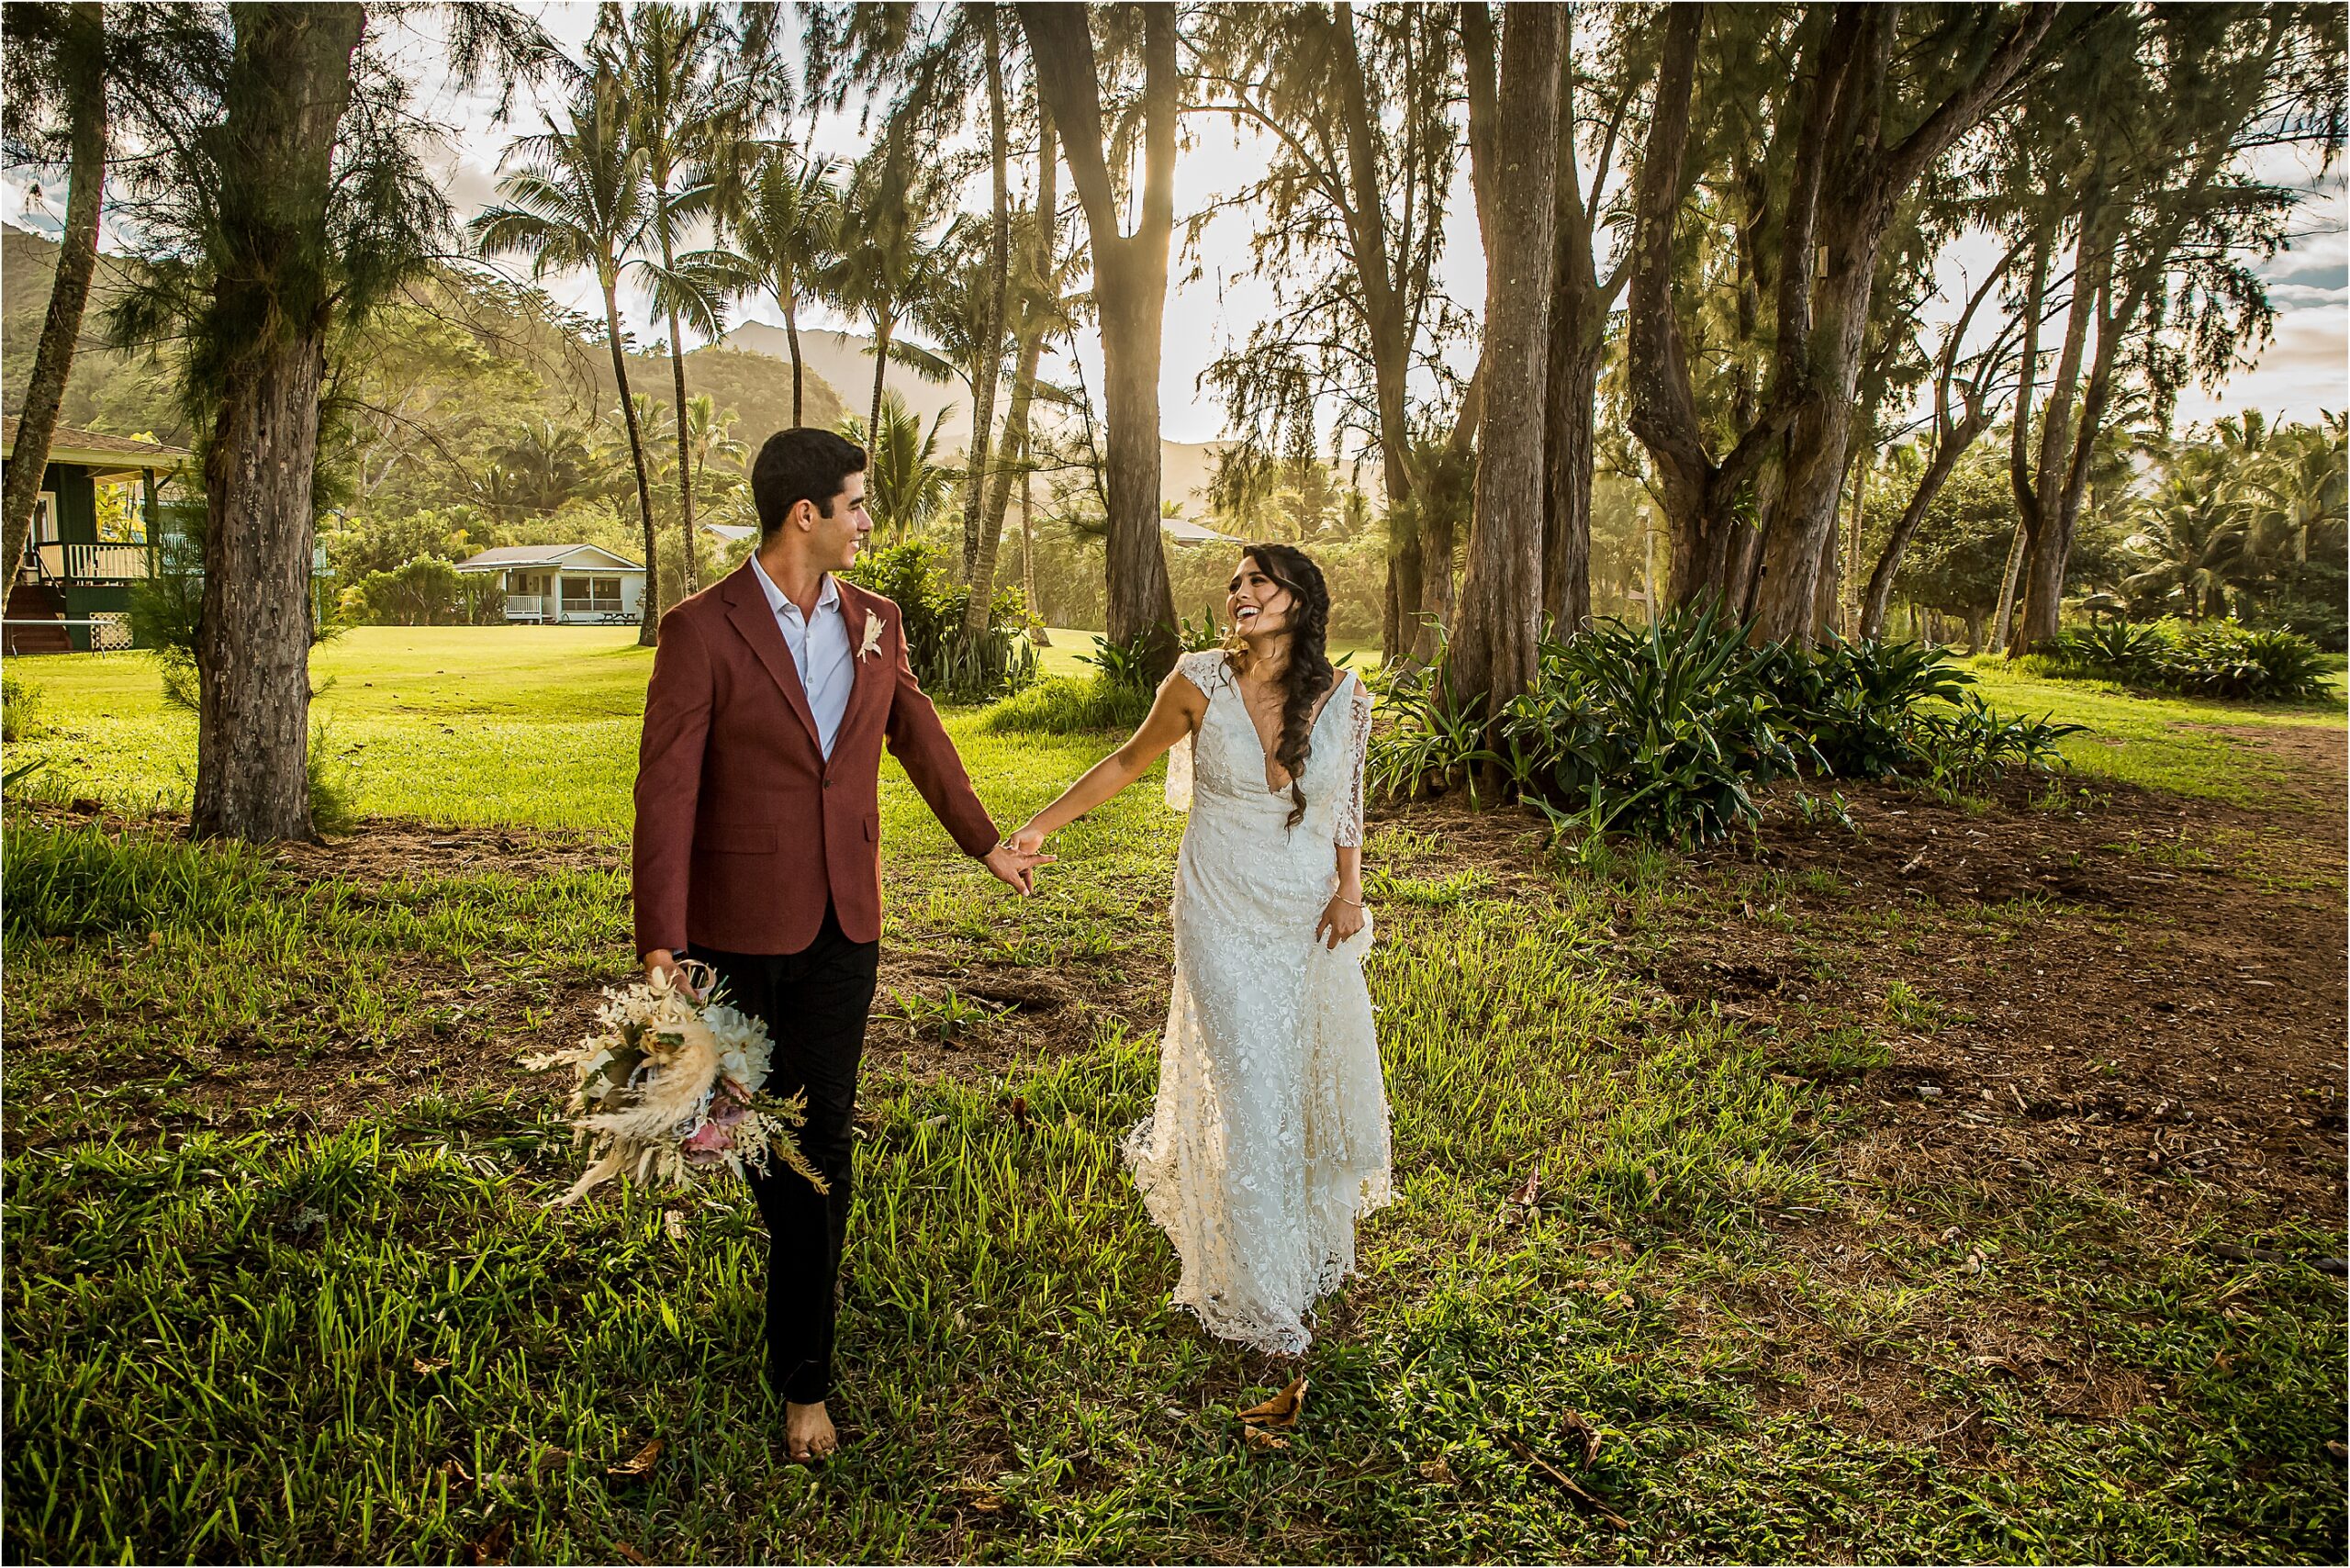 Golden hour on Hanalei bay with bride and groom for their elopement